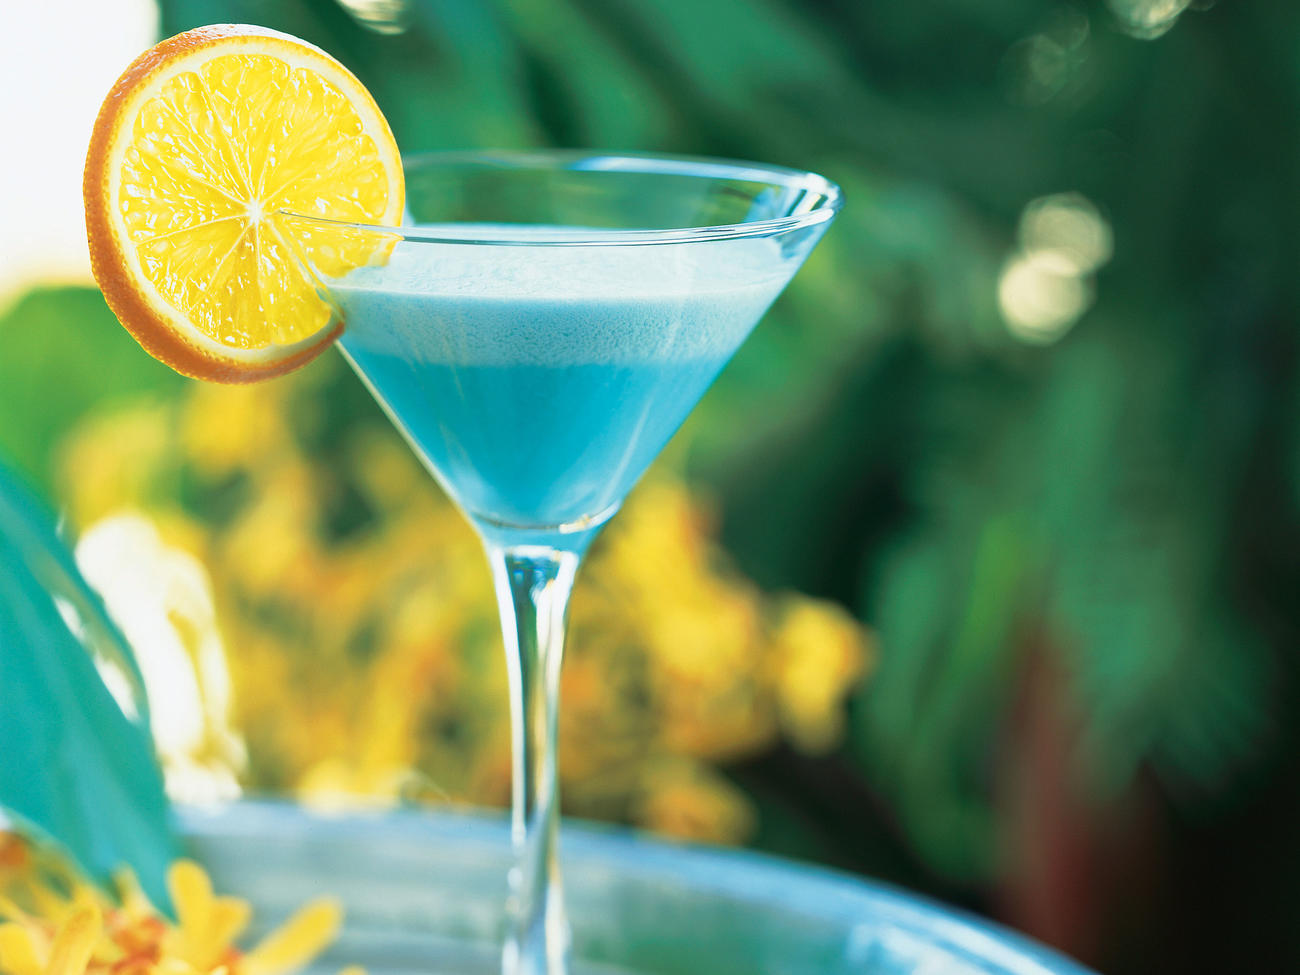 5 Vodka Cocktails: Blue Moon, SoCal, and More